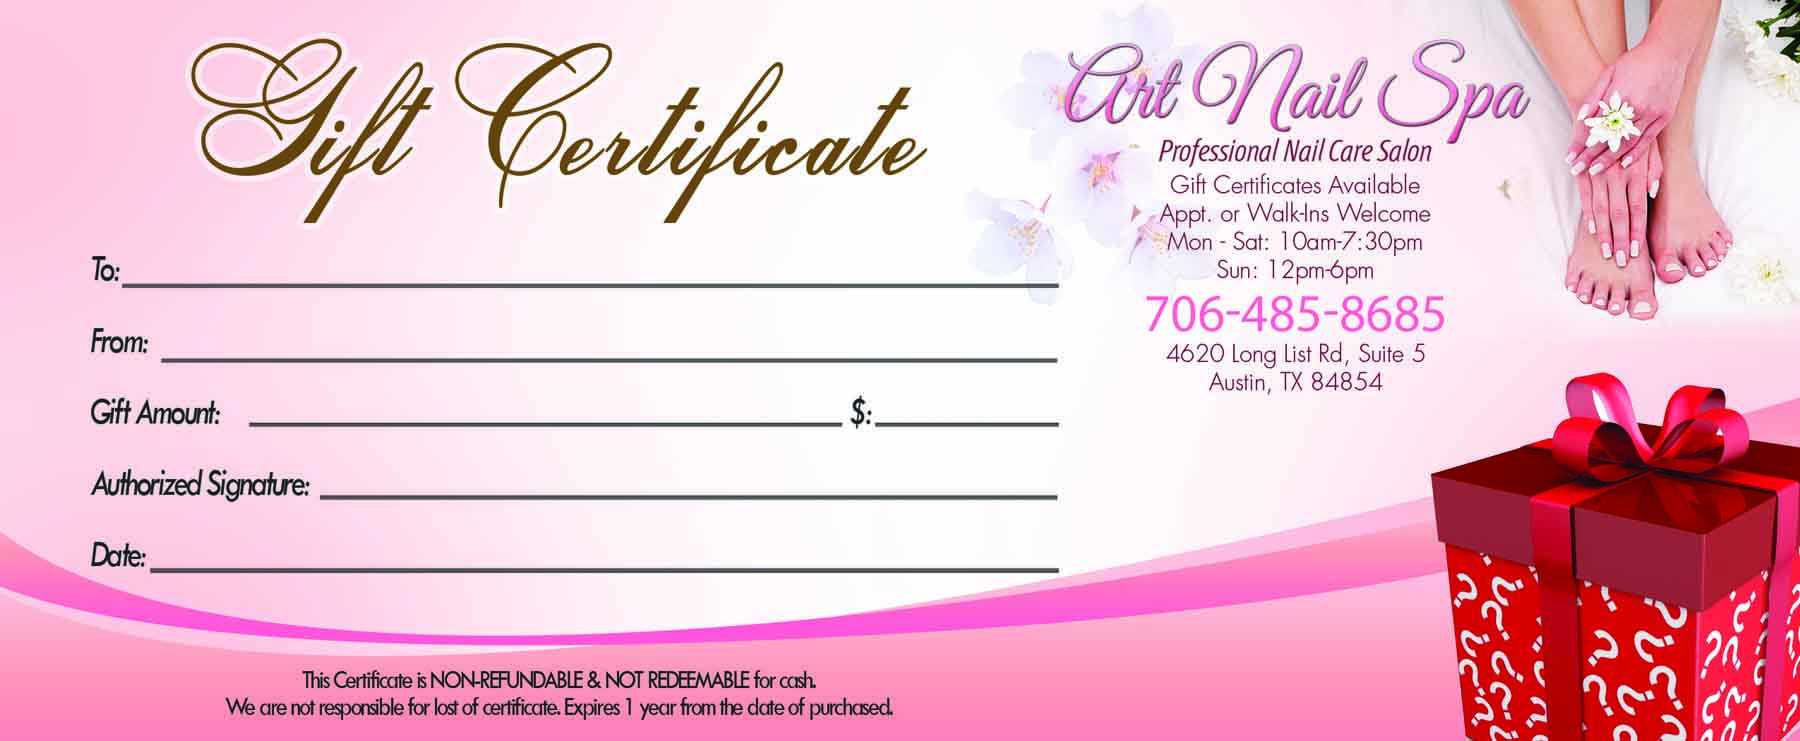 Welcome Certificate Template ] – 50 Diploma And Certificate Inside Salon Gift Certificate Template